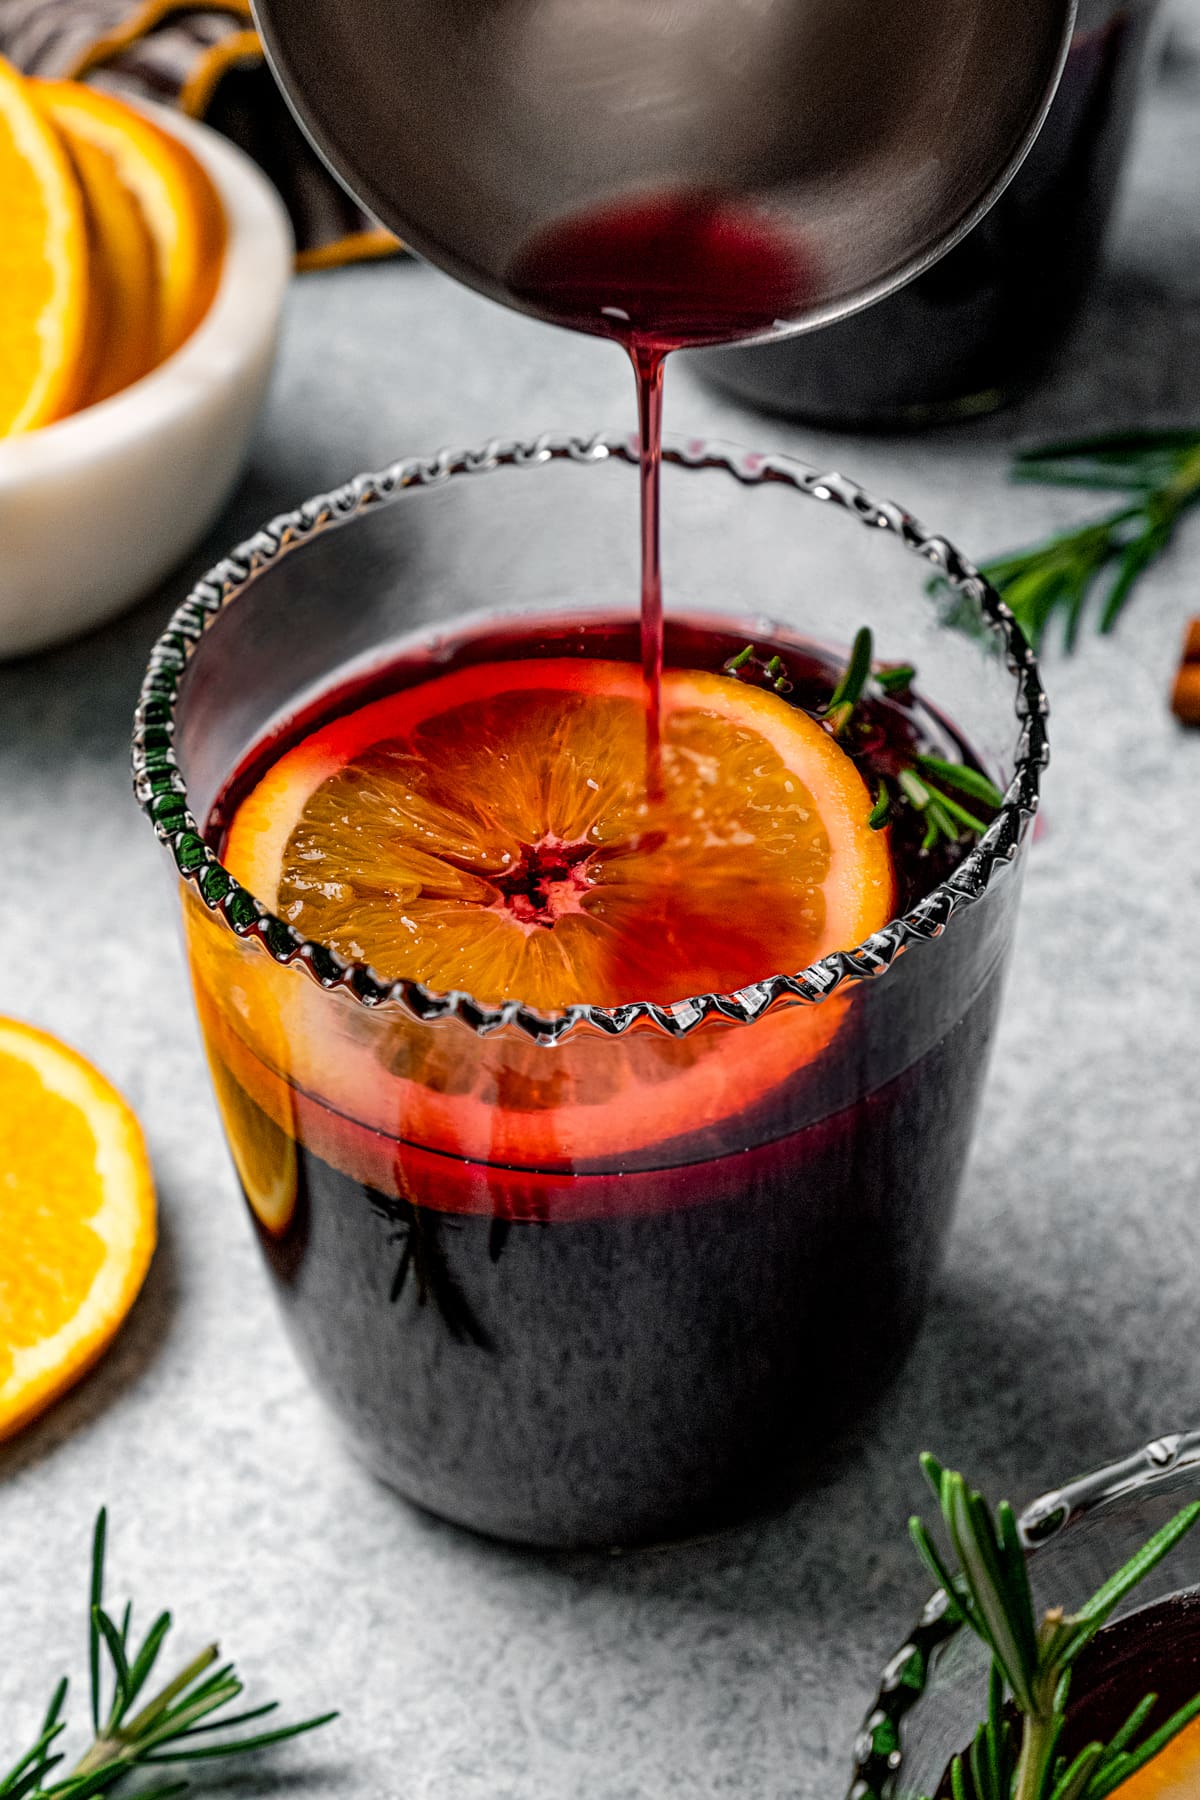 Mulled wine is poured into a glass garnished with an orange slice.